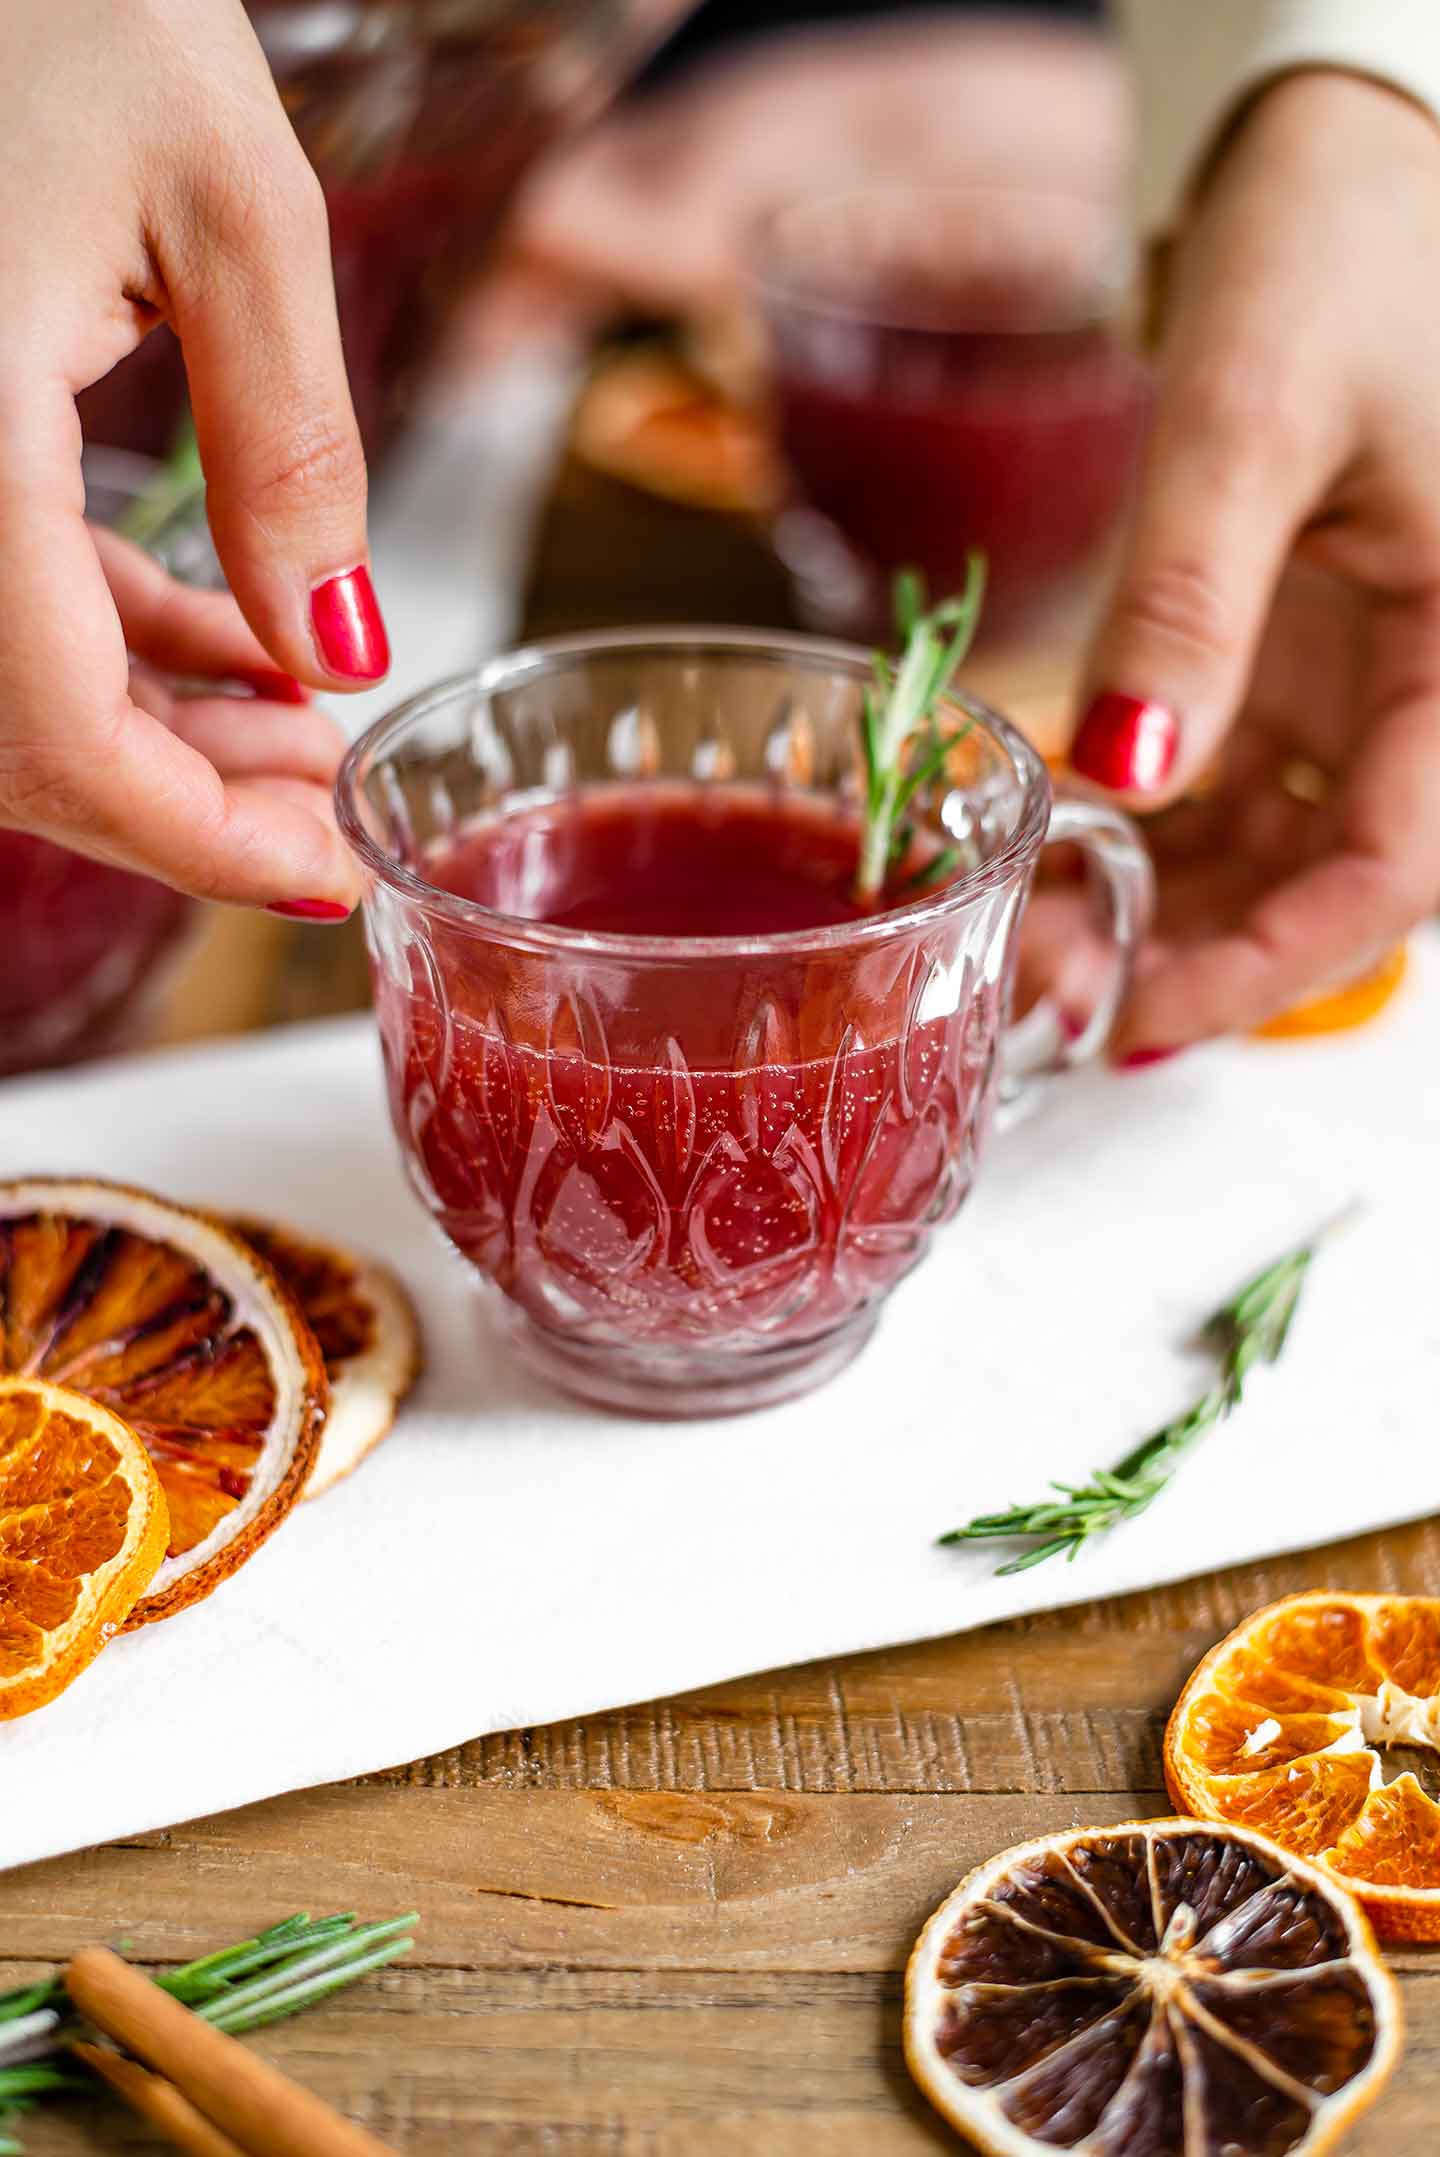 Side view of hands reaching for a small punch glass filled with pomegranate rum punch. Small bubbles can be seen and the glass is garnished with a sprig of rosemary.